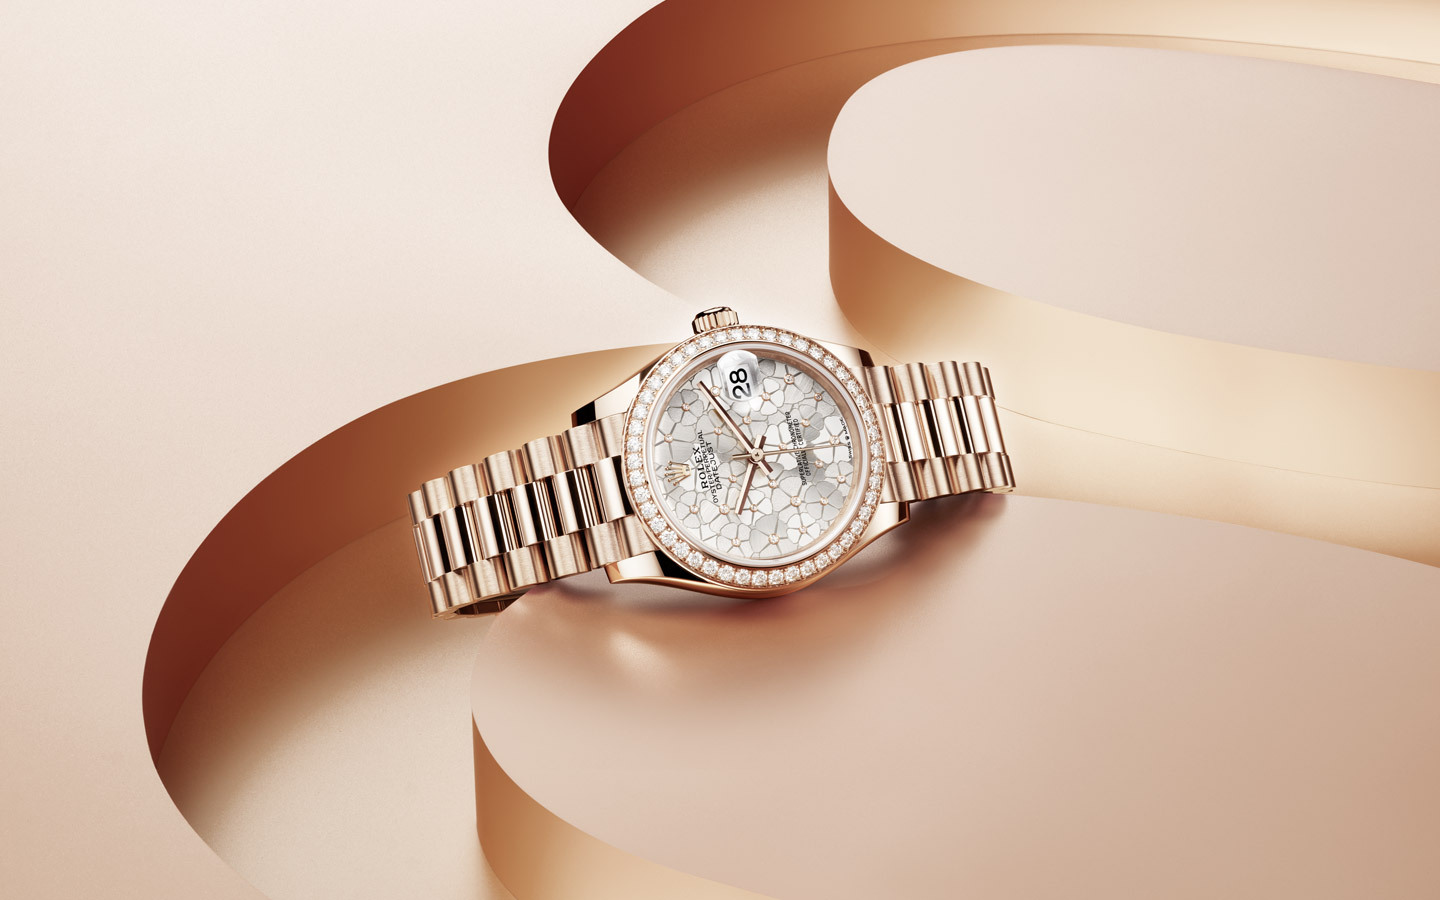 Datejust 31 in Oystersteel and Everose gold with floral motif dial and diamond bezel